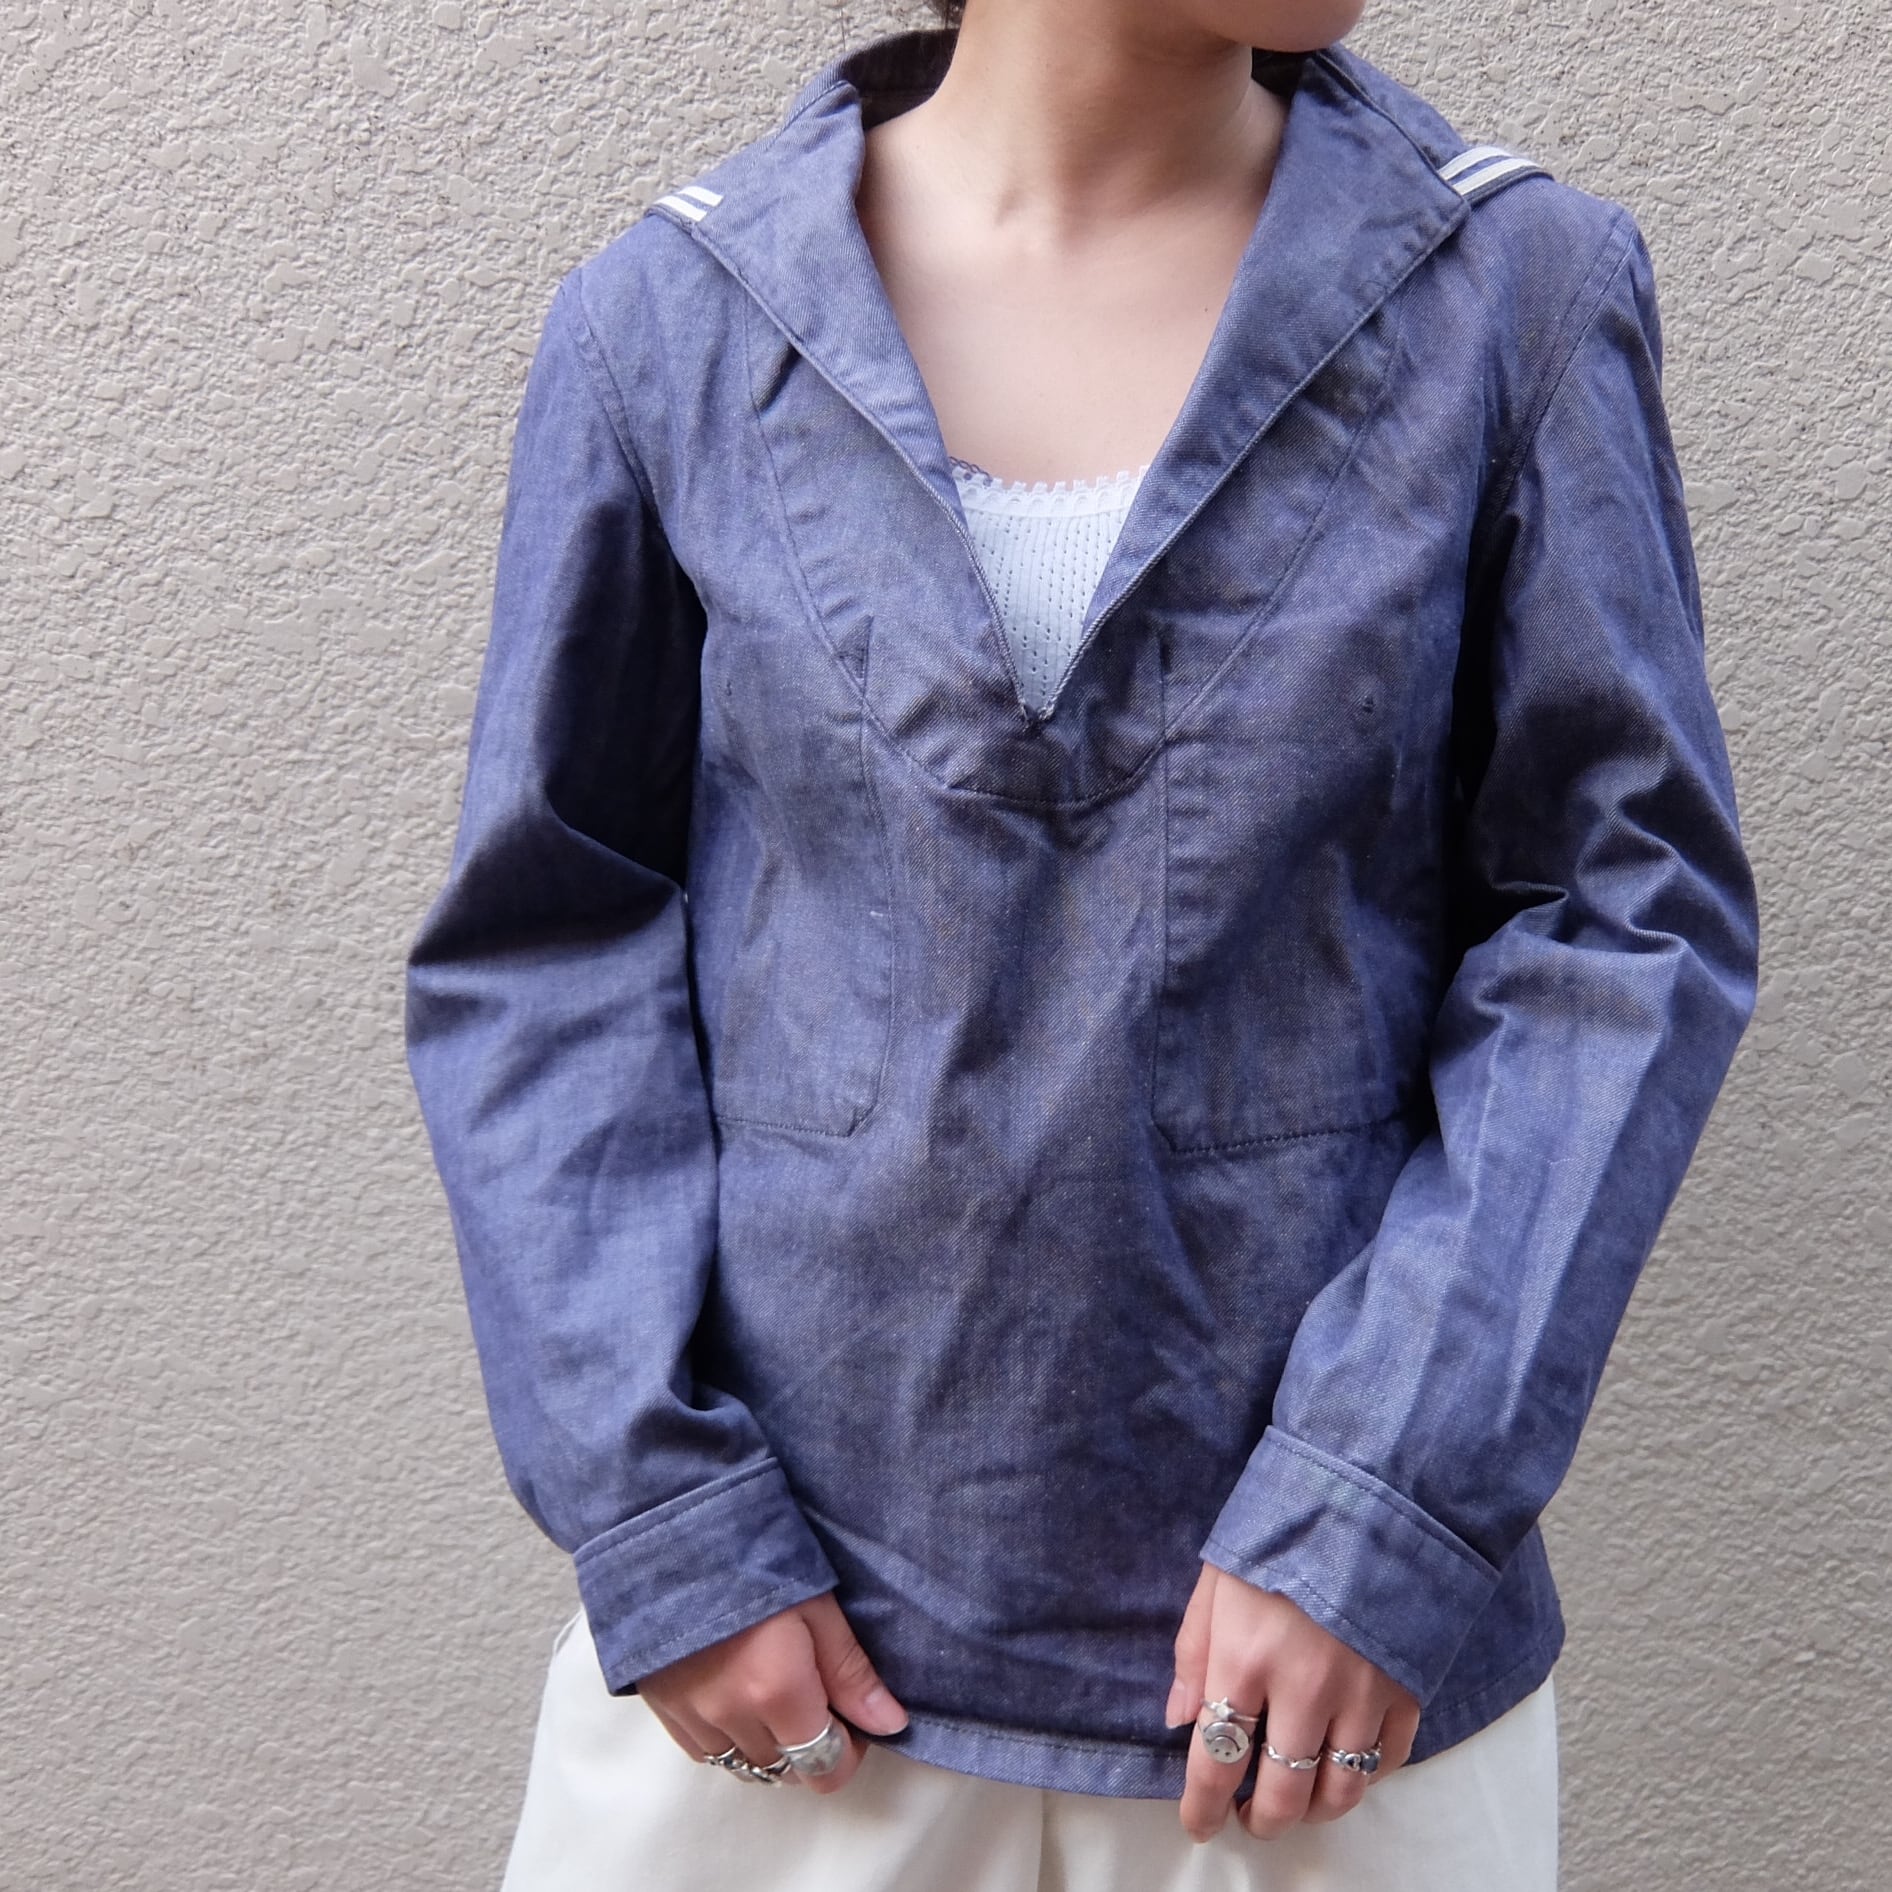 70's French NAVY sailor shirt／70年代 フランス海軍 セーラー シャツ | BIG TIME ｜ヴィンテージ 古着  BIGTIME（ビッグタイム） powered by BASE